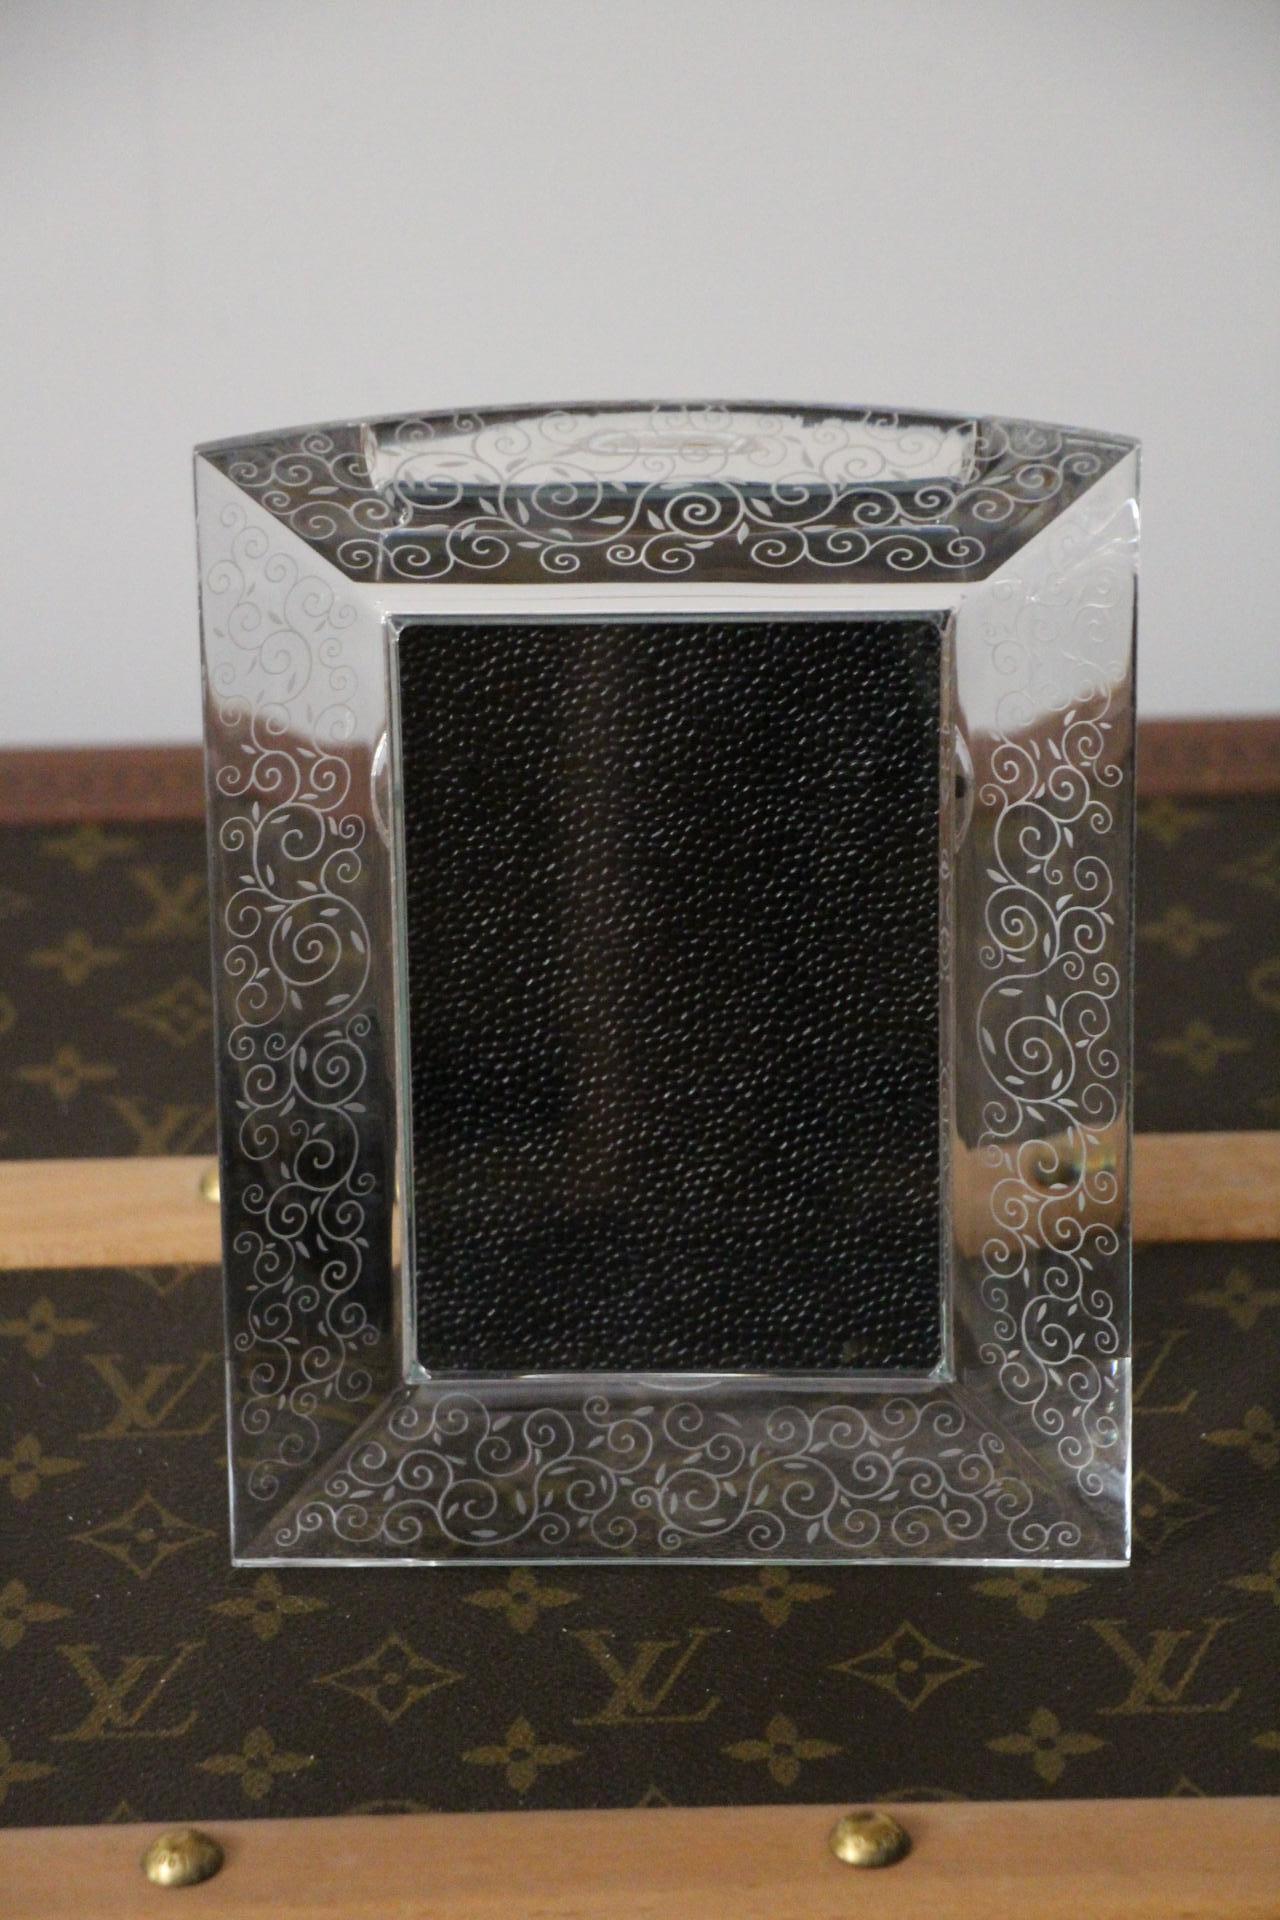 This superb picture frame in crystal was made by the famous luxury French Baccarat company, situated in East of France .Its design is modern and classical at the same time. Its engraved motifs were made by hand in Baccarat worksop.It is signed on